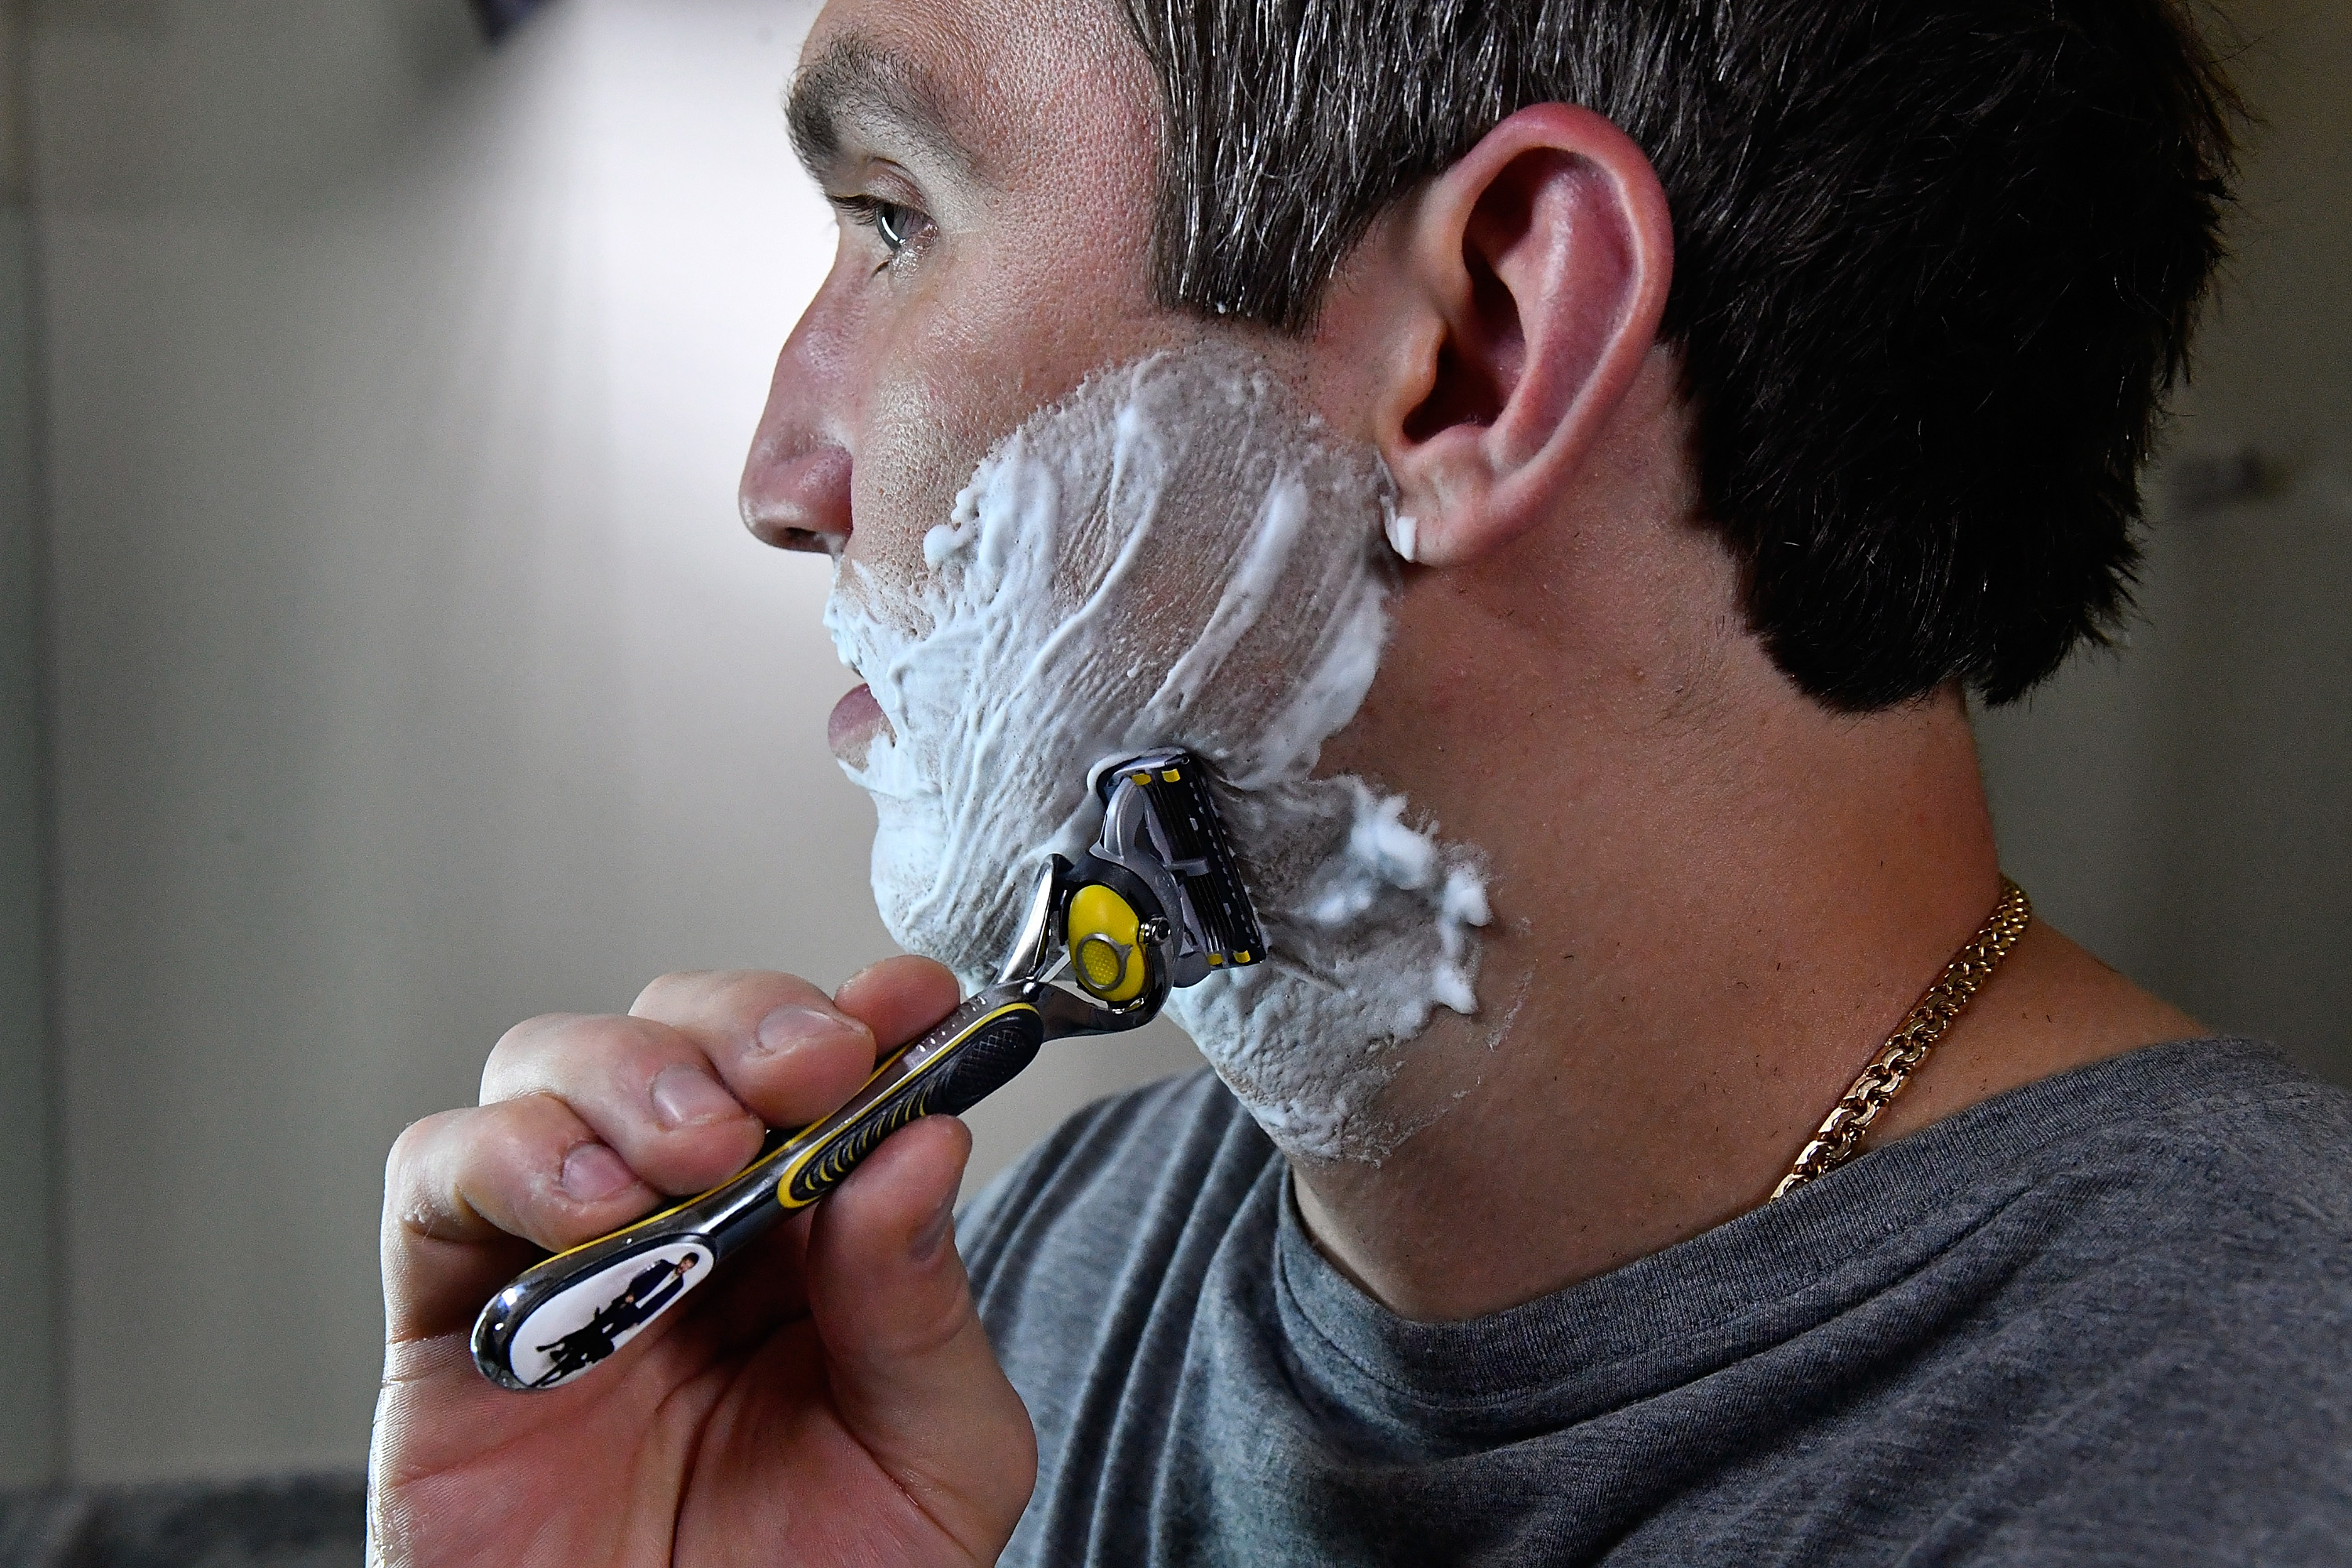 World Champion hockey star Alex Ovechkin shaves his "playoff beard" with the Gillette Fusion ProShield Razor during an official Gillette Shave event on June 13, 2018 in Mclean, Virginia. (Photo by Larry French/Getty Images for Gillette)